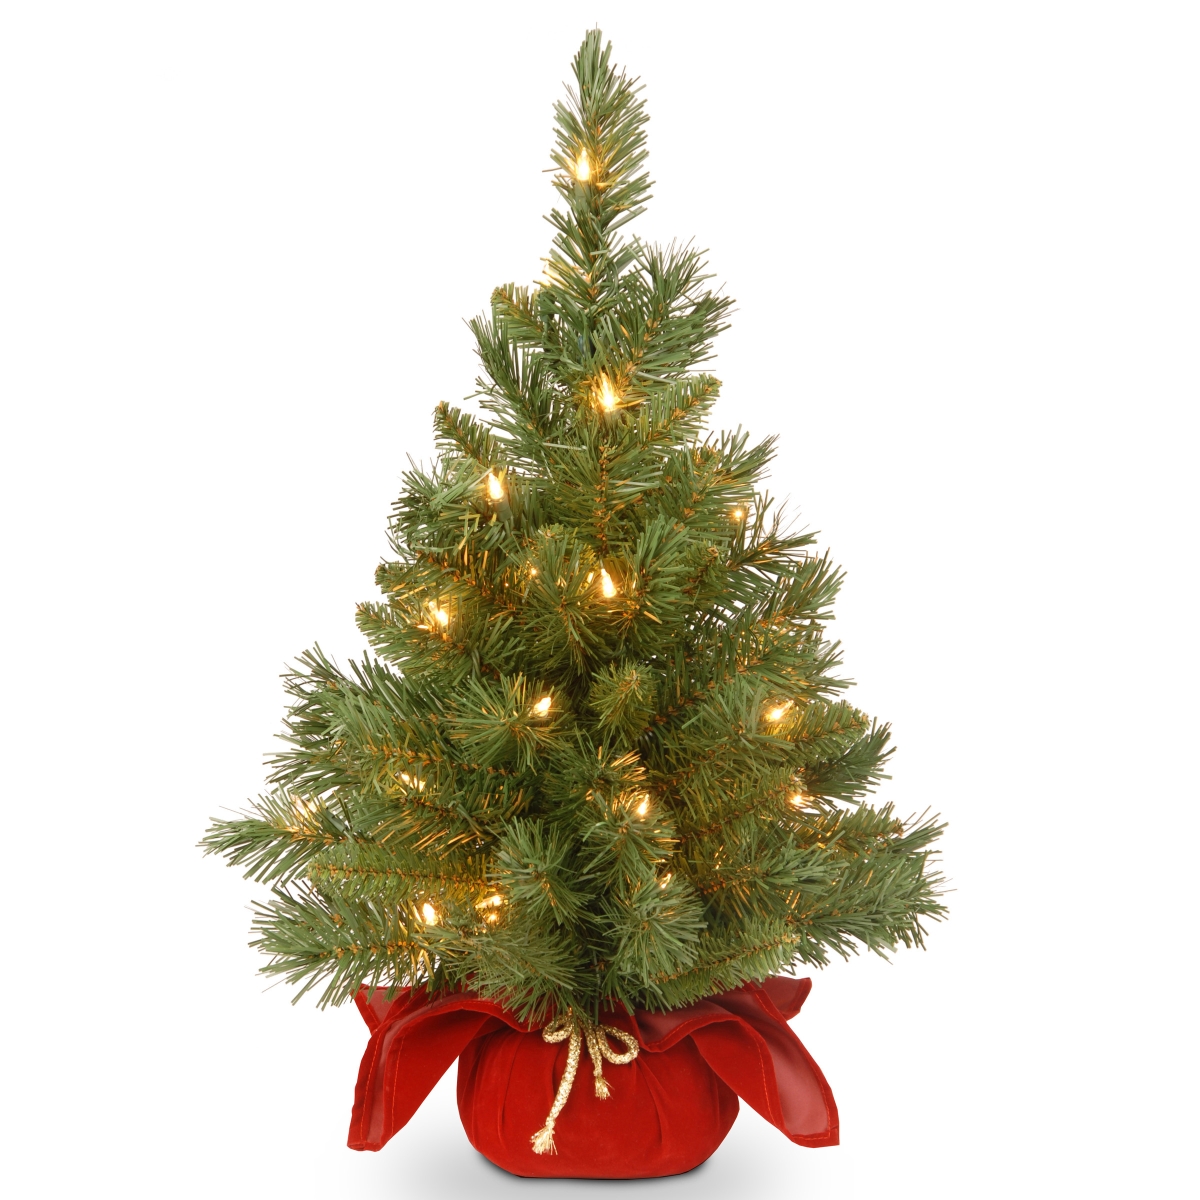 24 In. Majestic Spruce Tree In Burgundy Cloth Bag With 35 Warm White Battery Operated Operated Led Lights